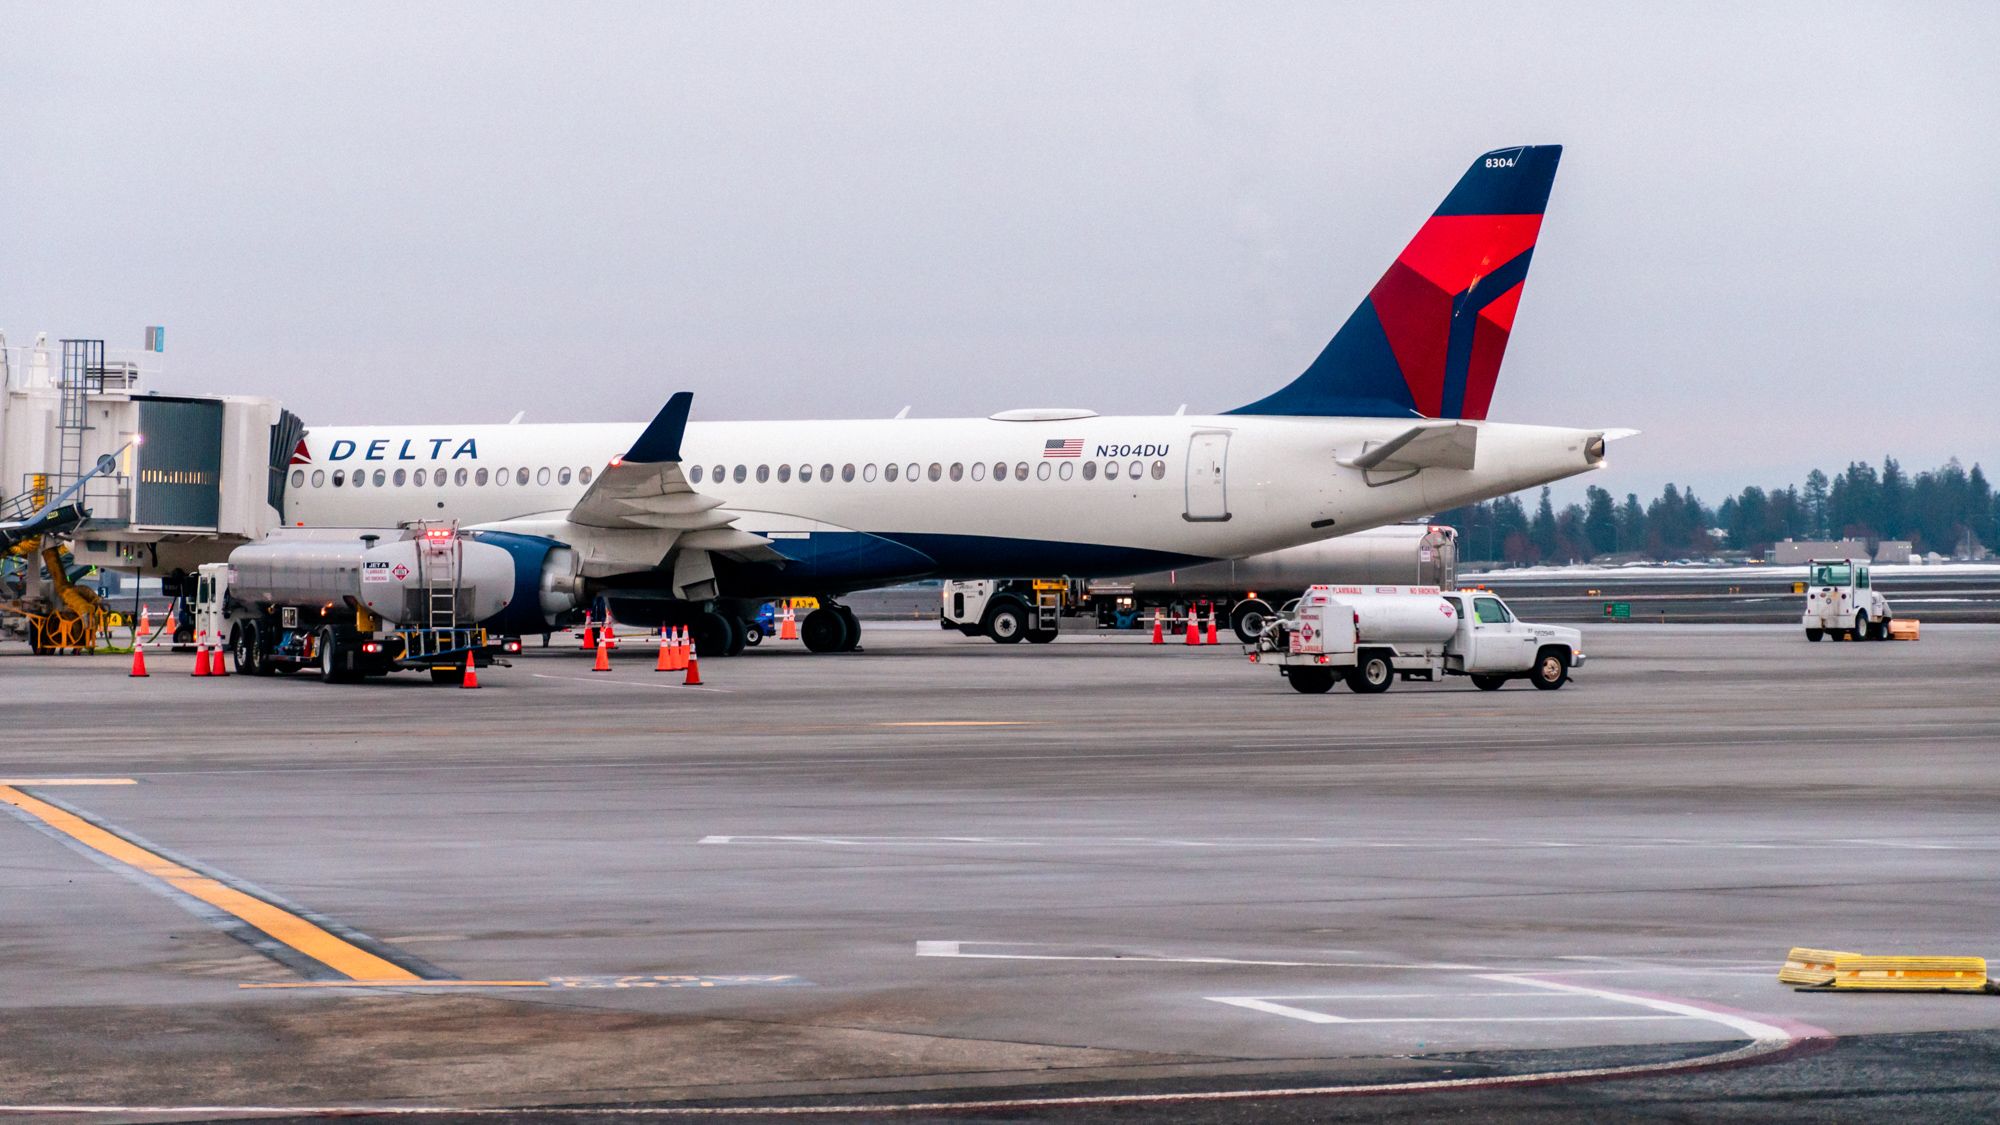 A Delta A220 at the Gate at Spokane International.